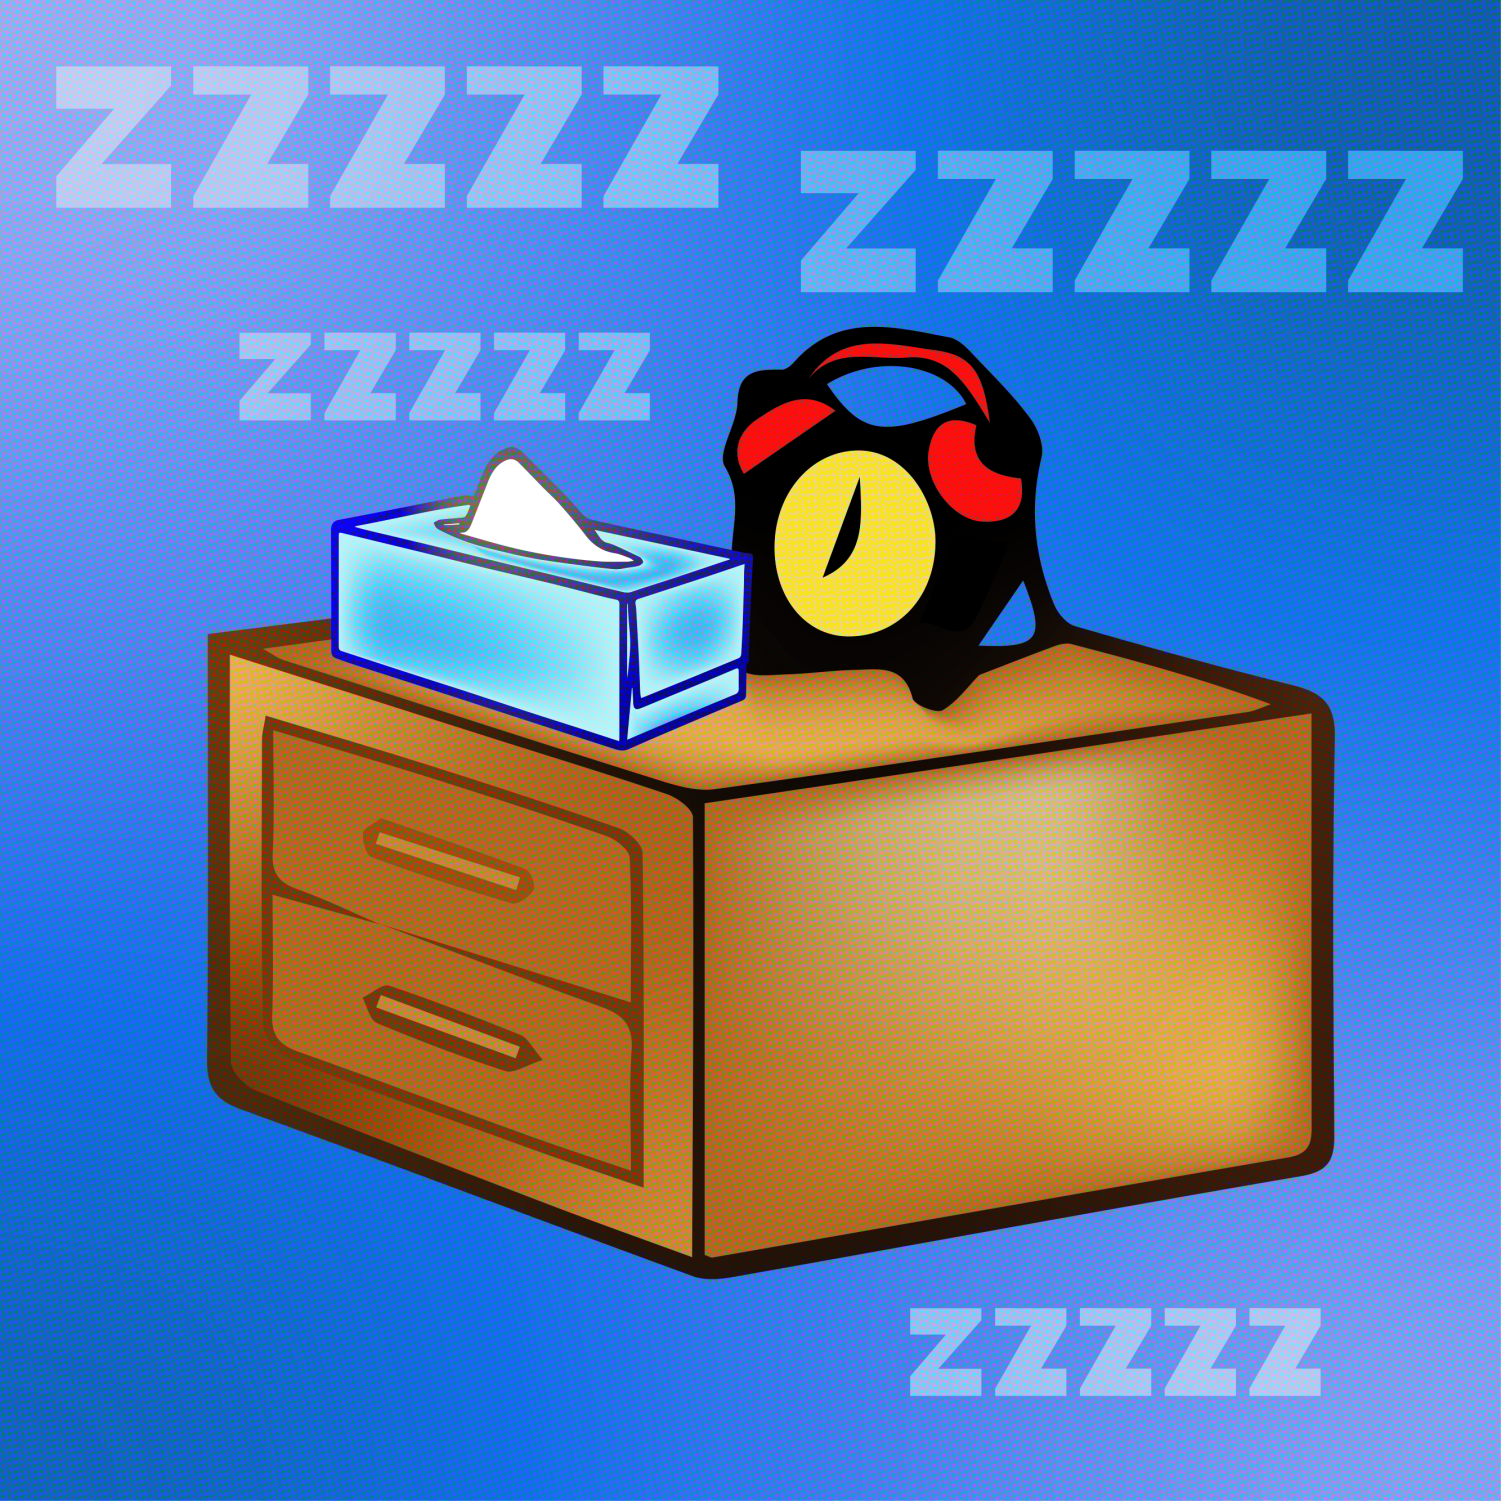 Graphic of a nightstand with tissues, an alarm clock, and the sleep symbol "zzz"